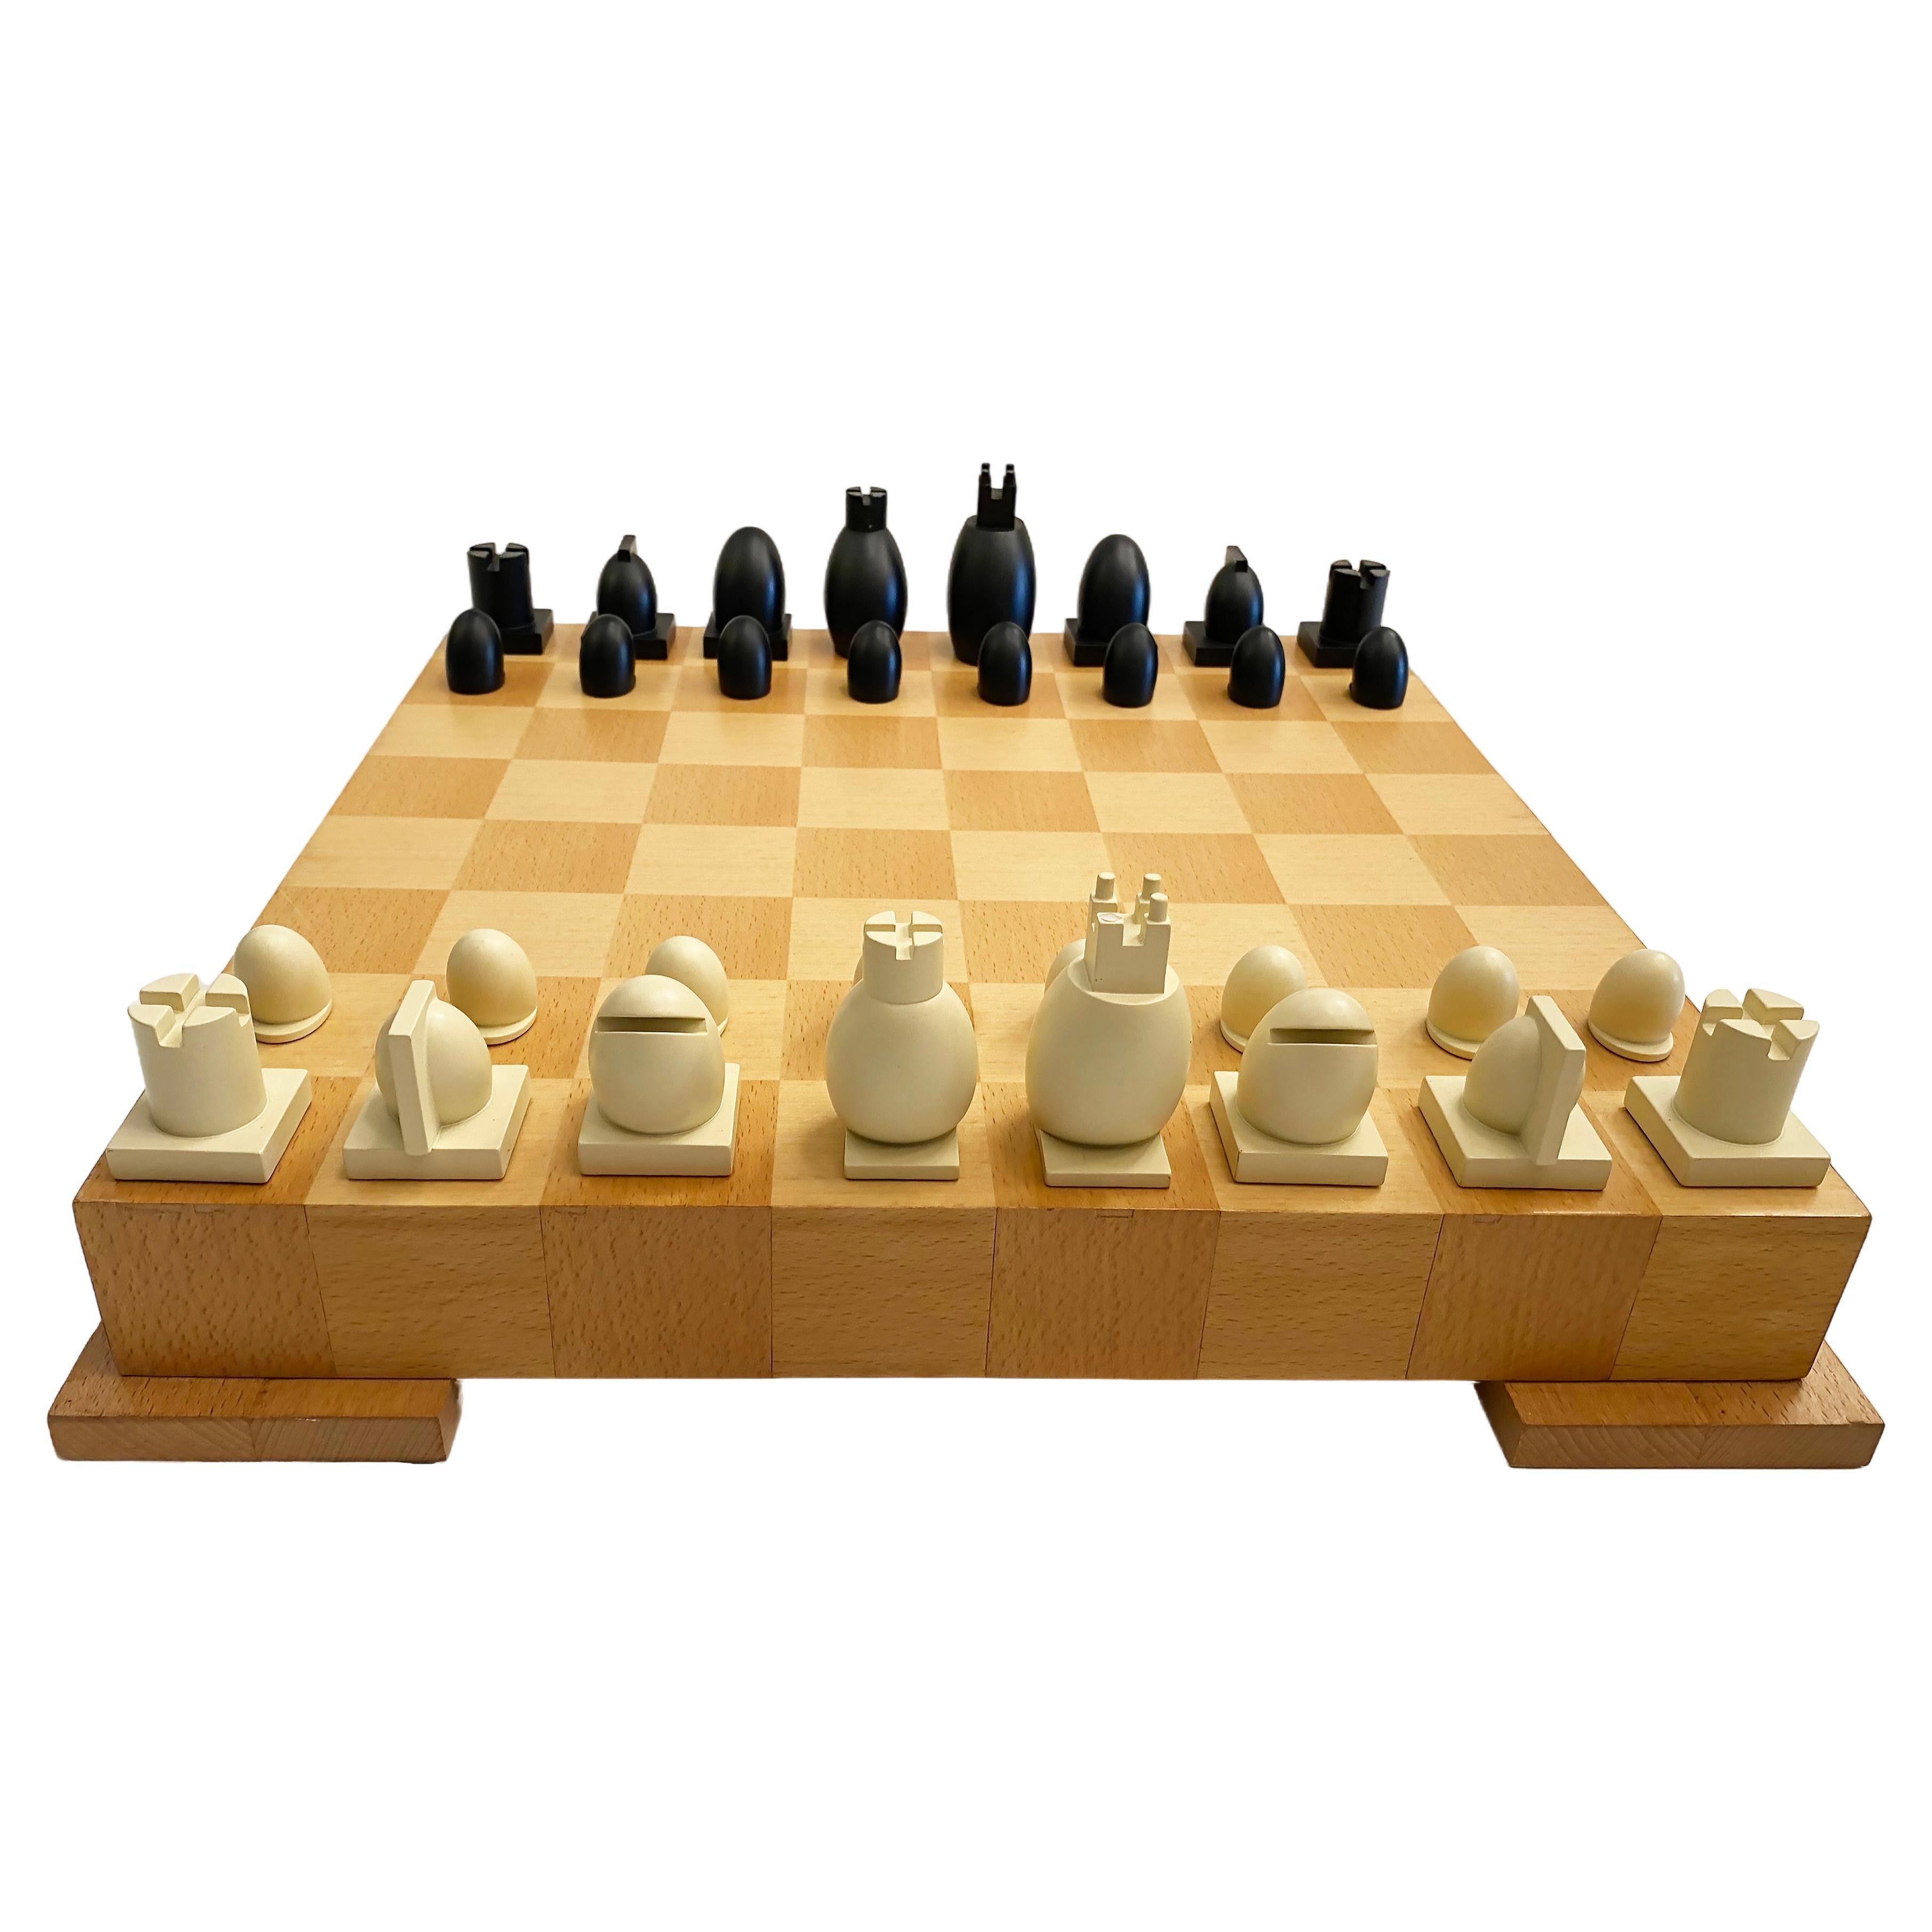 Michael Graves Post-modern Chess / Checkers Set Board Game and Pieces For Sale